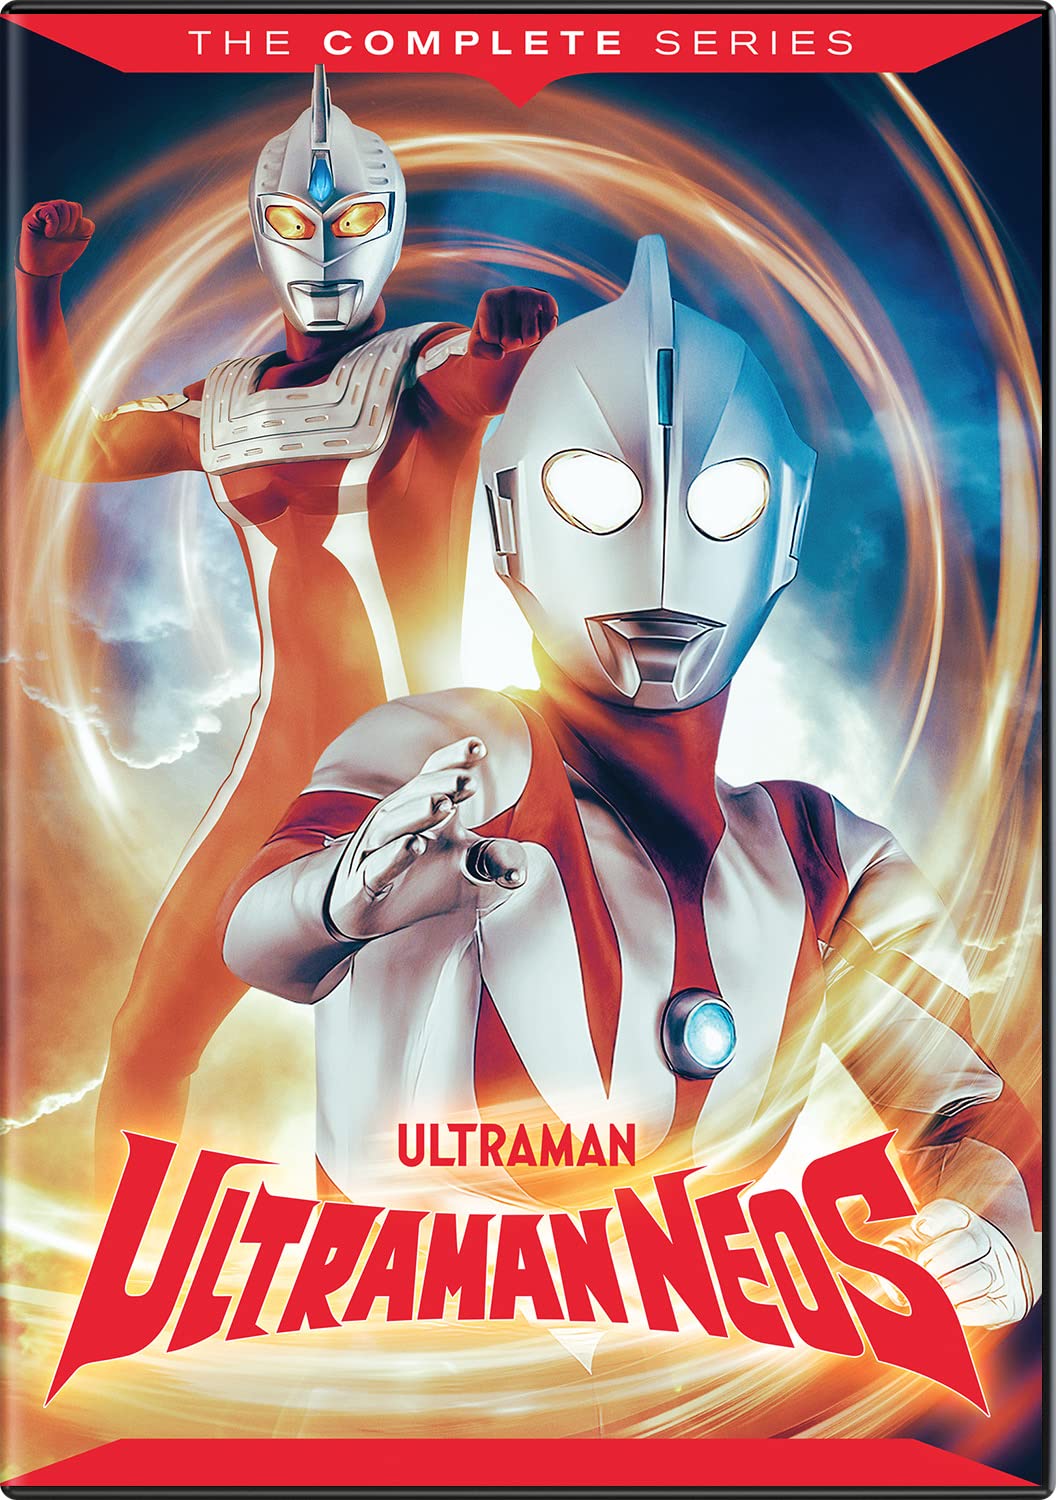 Ultraman X Series + Movie Combo Pack Blu-Ray $9, Ultraman Neos: Complete Series DVD $13.02 & More + Free Shipping w/ Prime or on Orders $25+